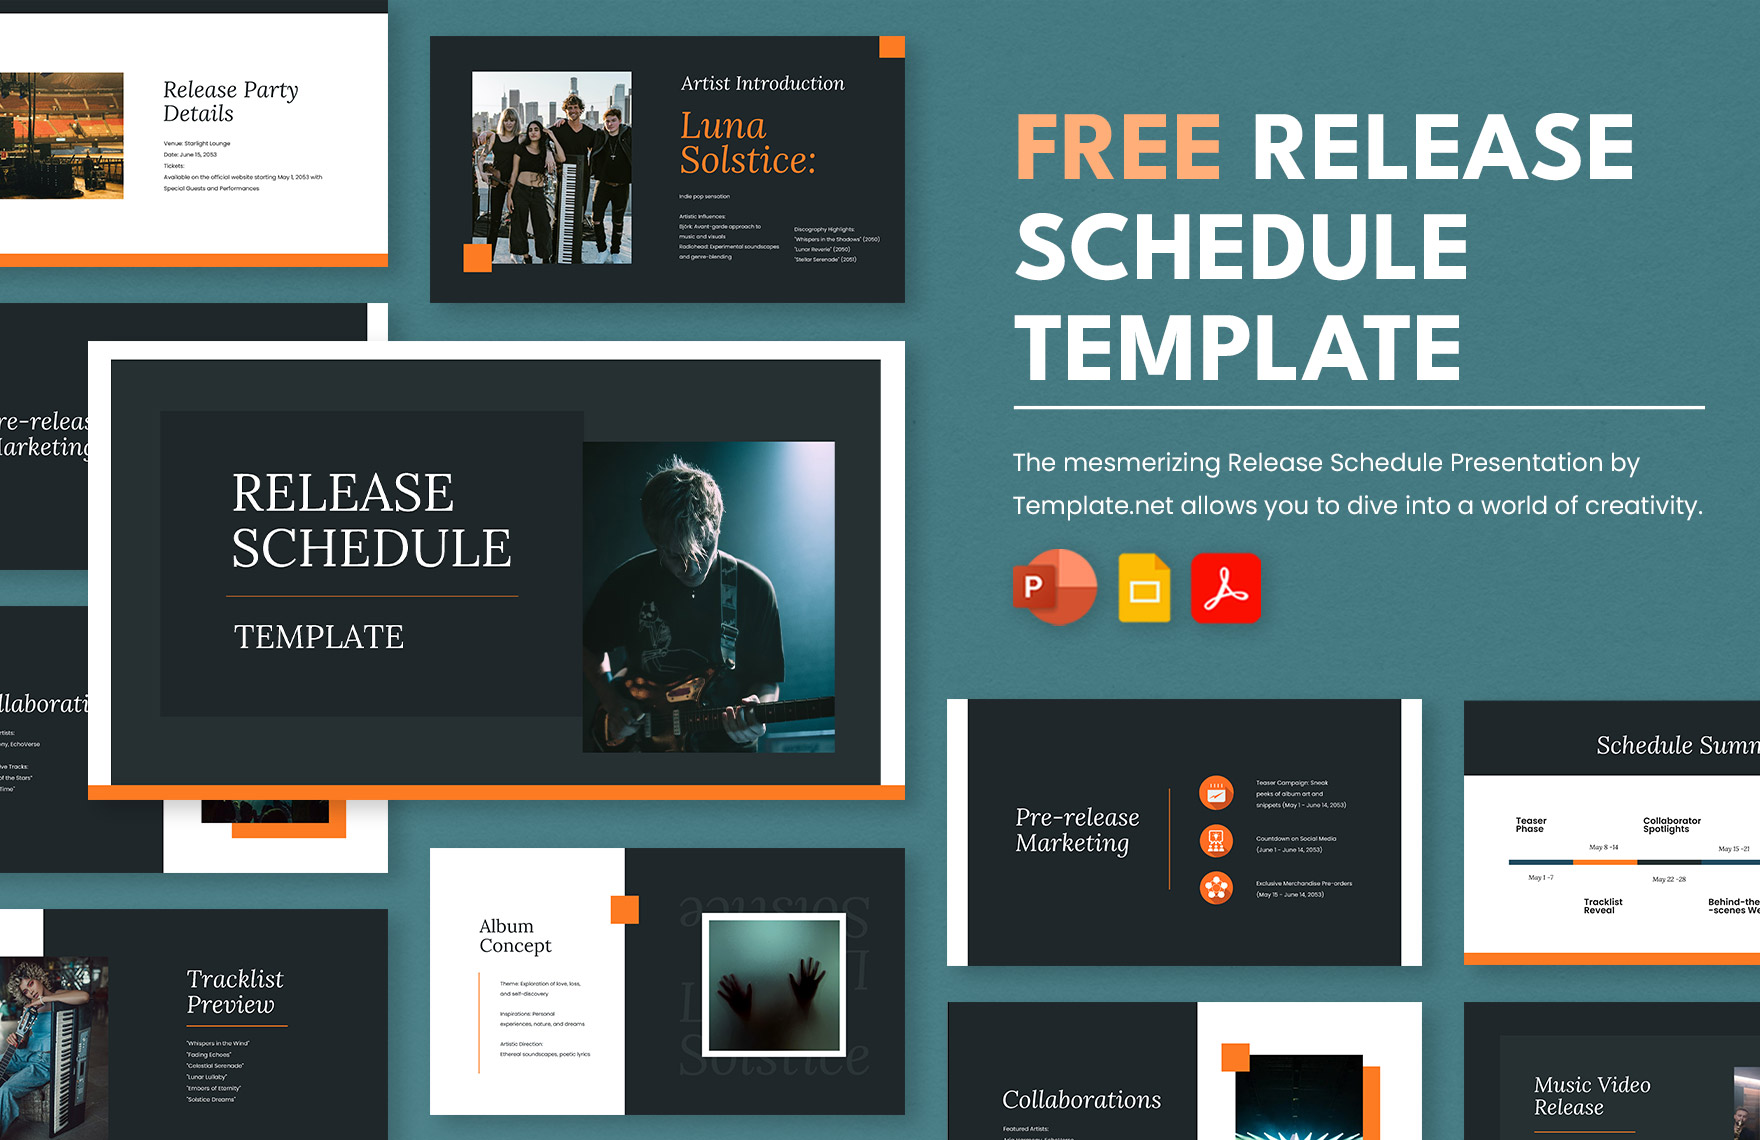 Schedule Template in PDF FREE Download Template net